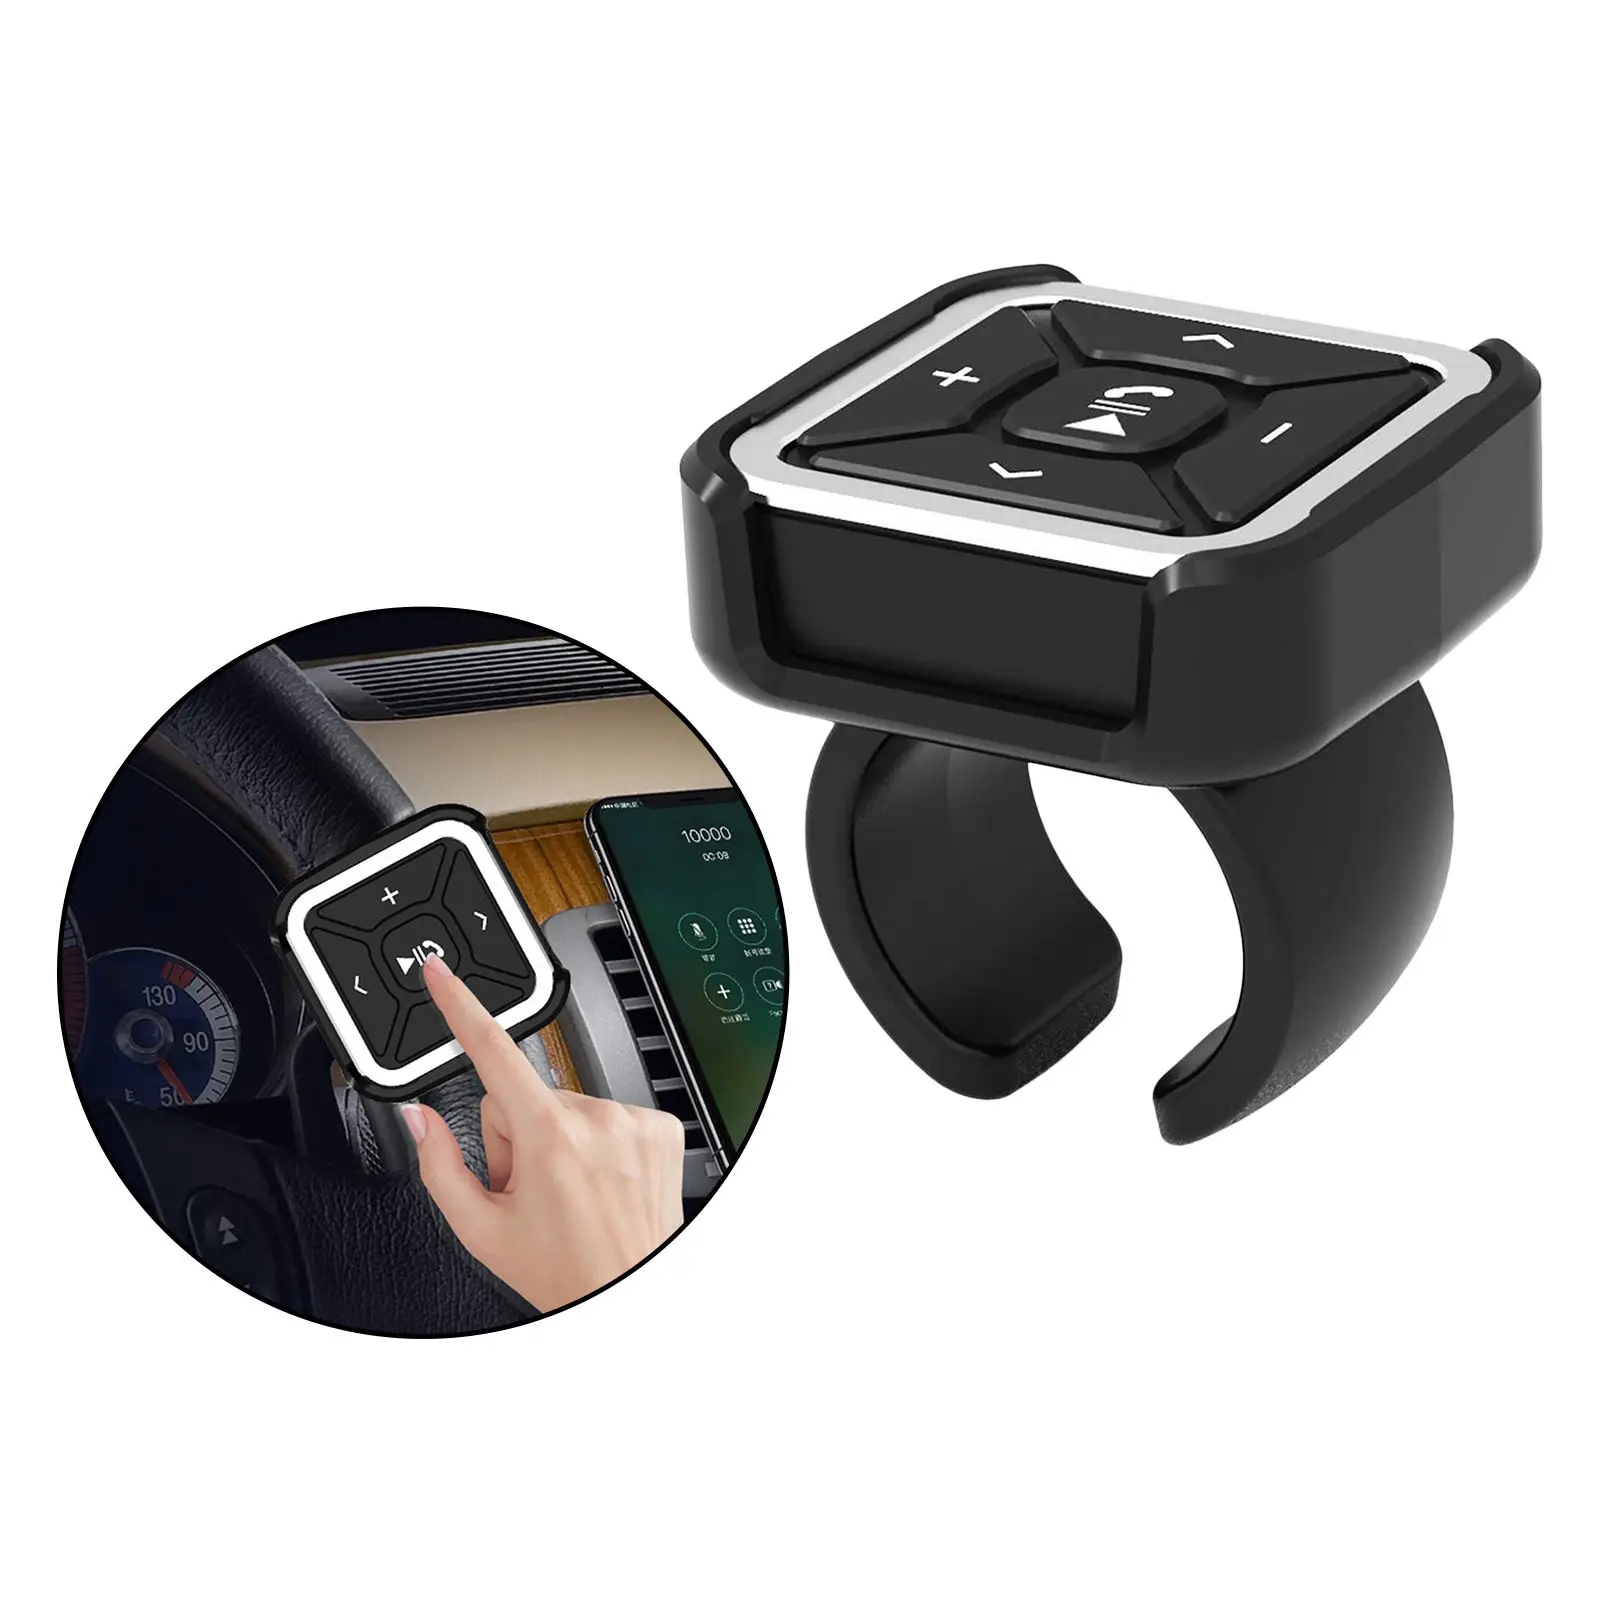 Car Steering Wheel Bike Mount Bluetooth 5.0 MP3 Media Buttons with